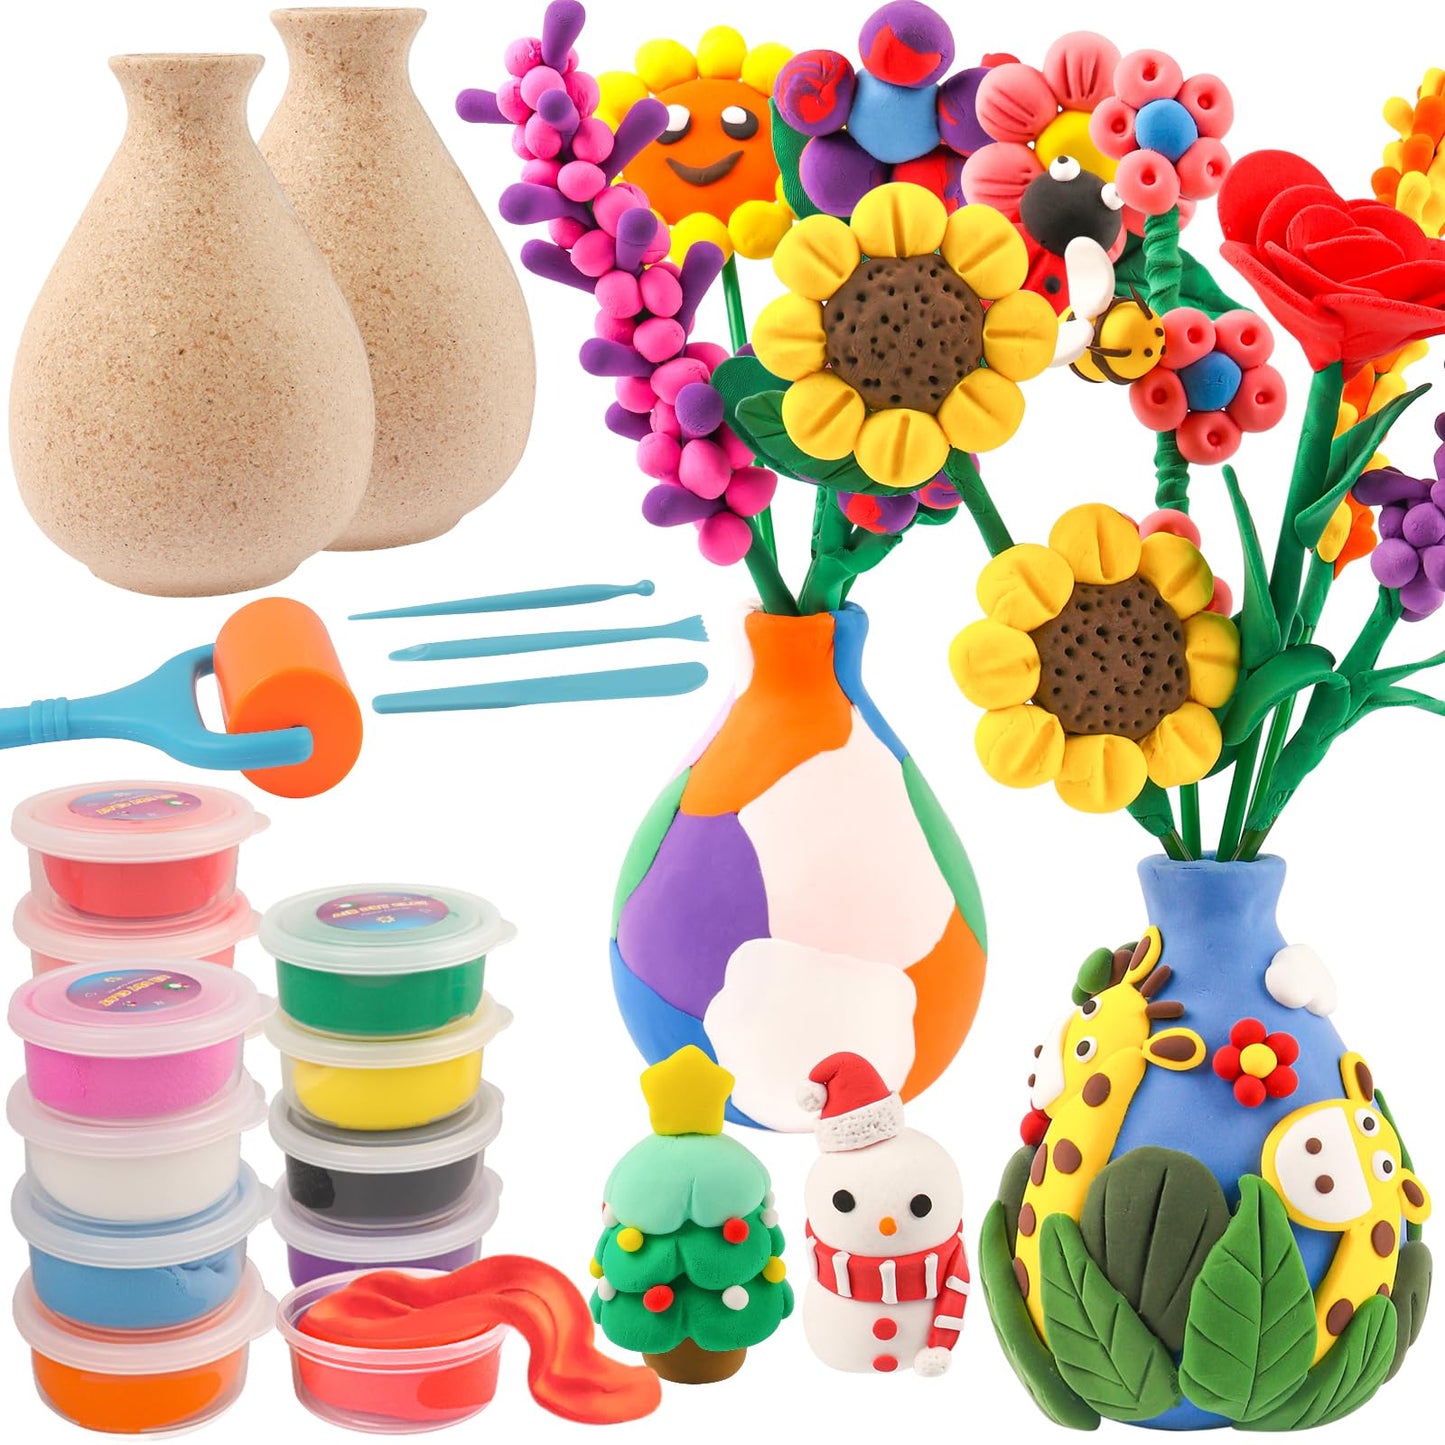 Alritz Flower Crafts Kit for Kids, Creating 2 Flower Bouquet Modeling Clay Kit for Girls, Arts and Crafts Air Dry Clay, Christmas Decorations Indoors